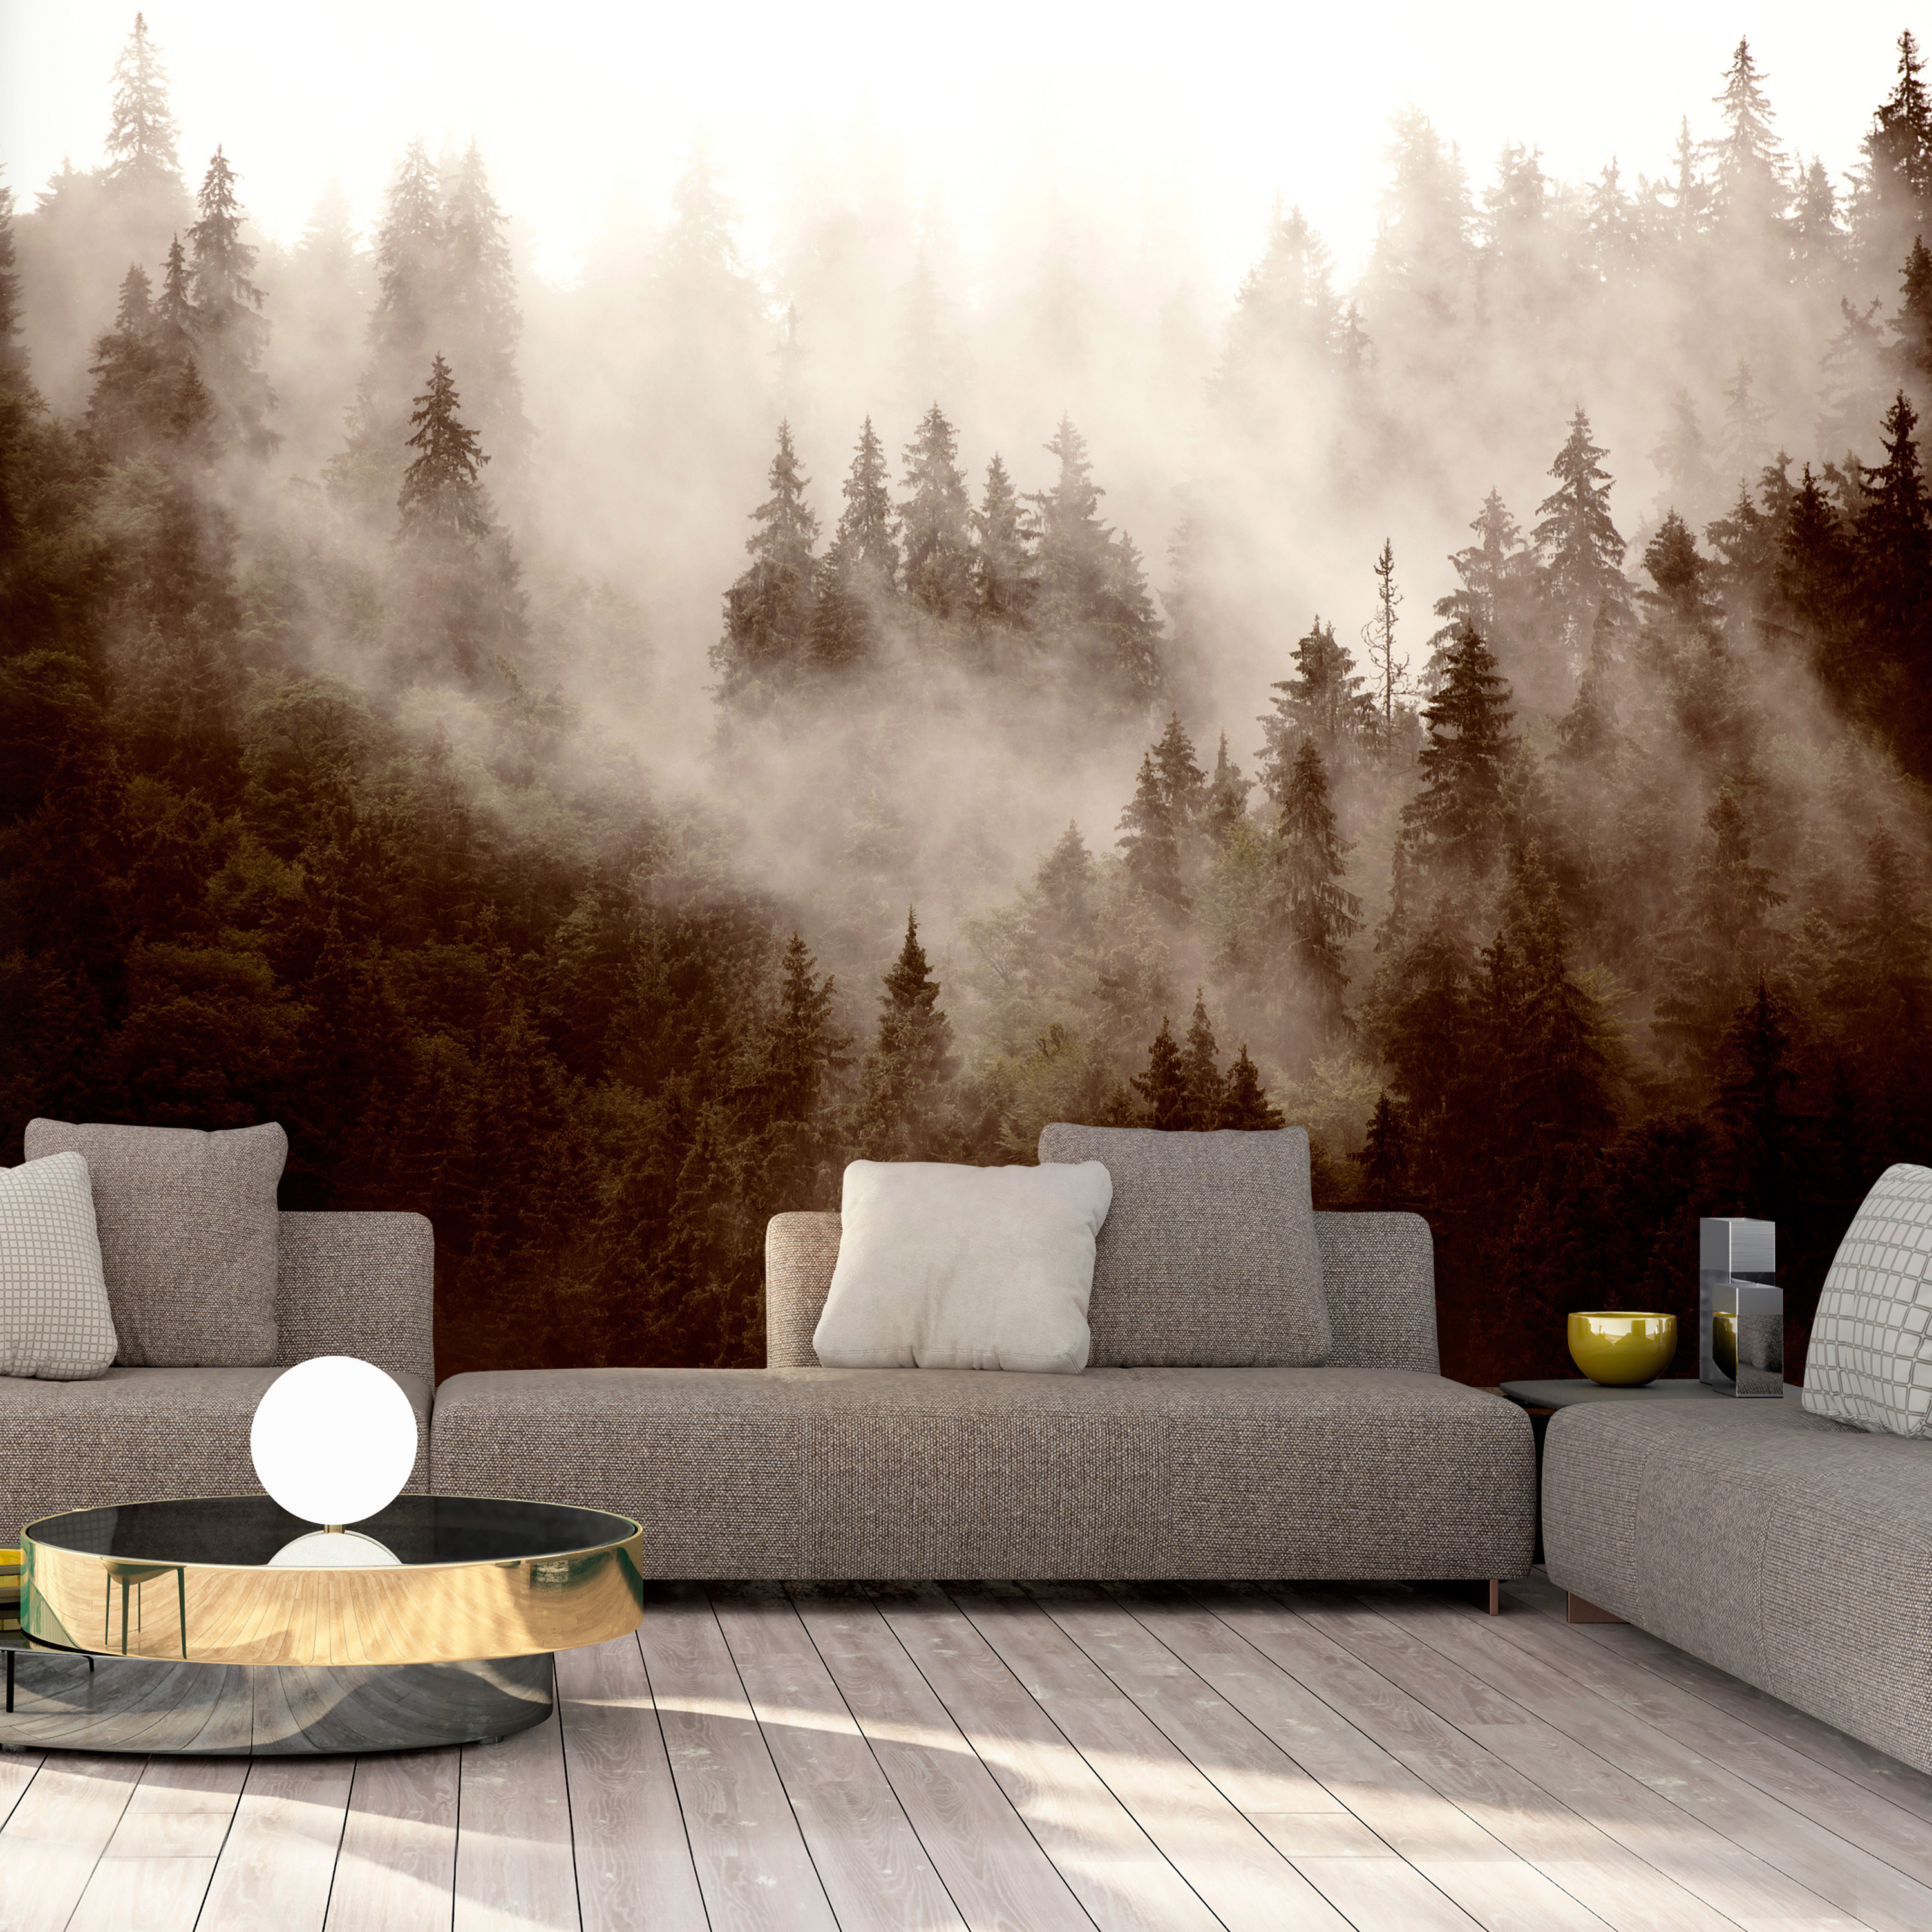 Self-adhesive Wallpaper - Mountain Forest (Sepia) - 245x175